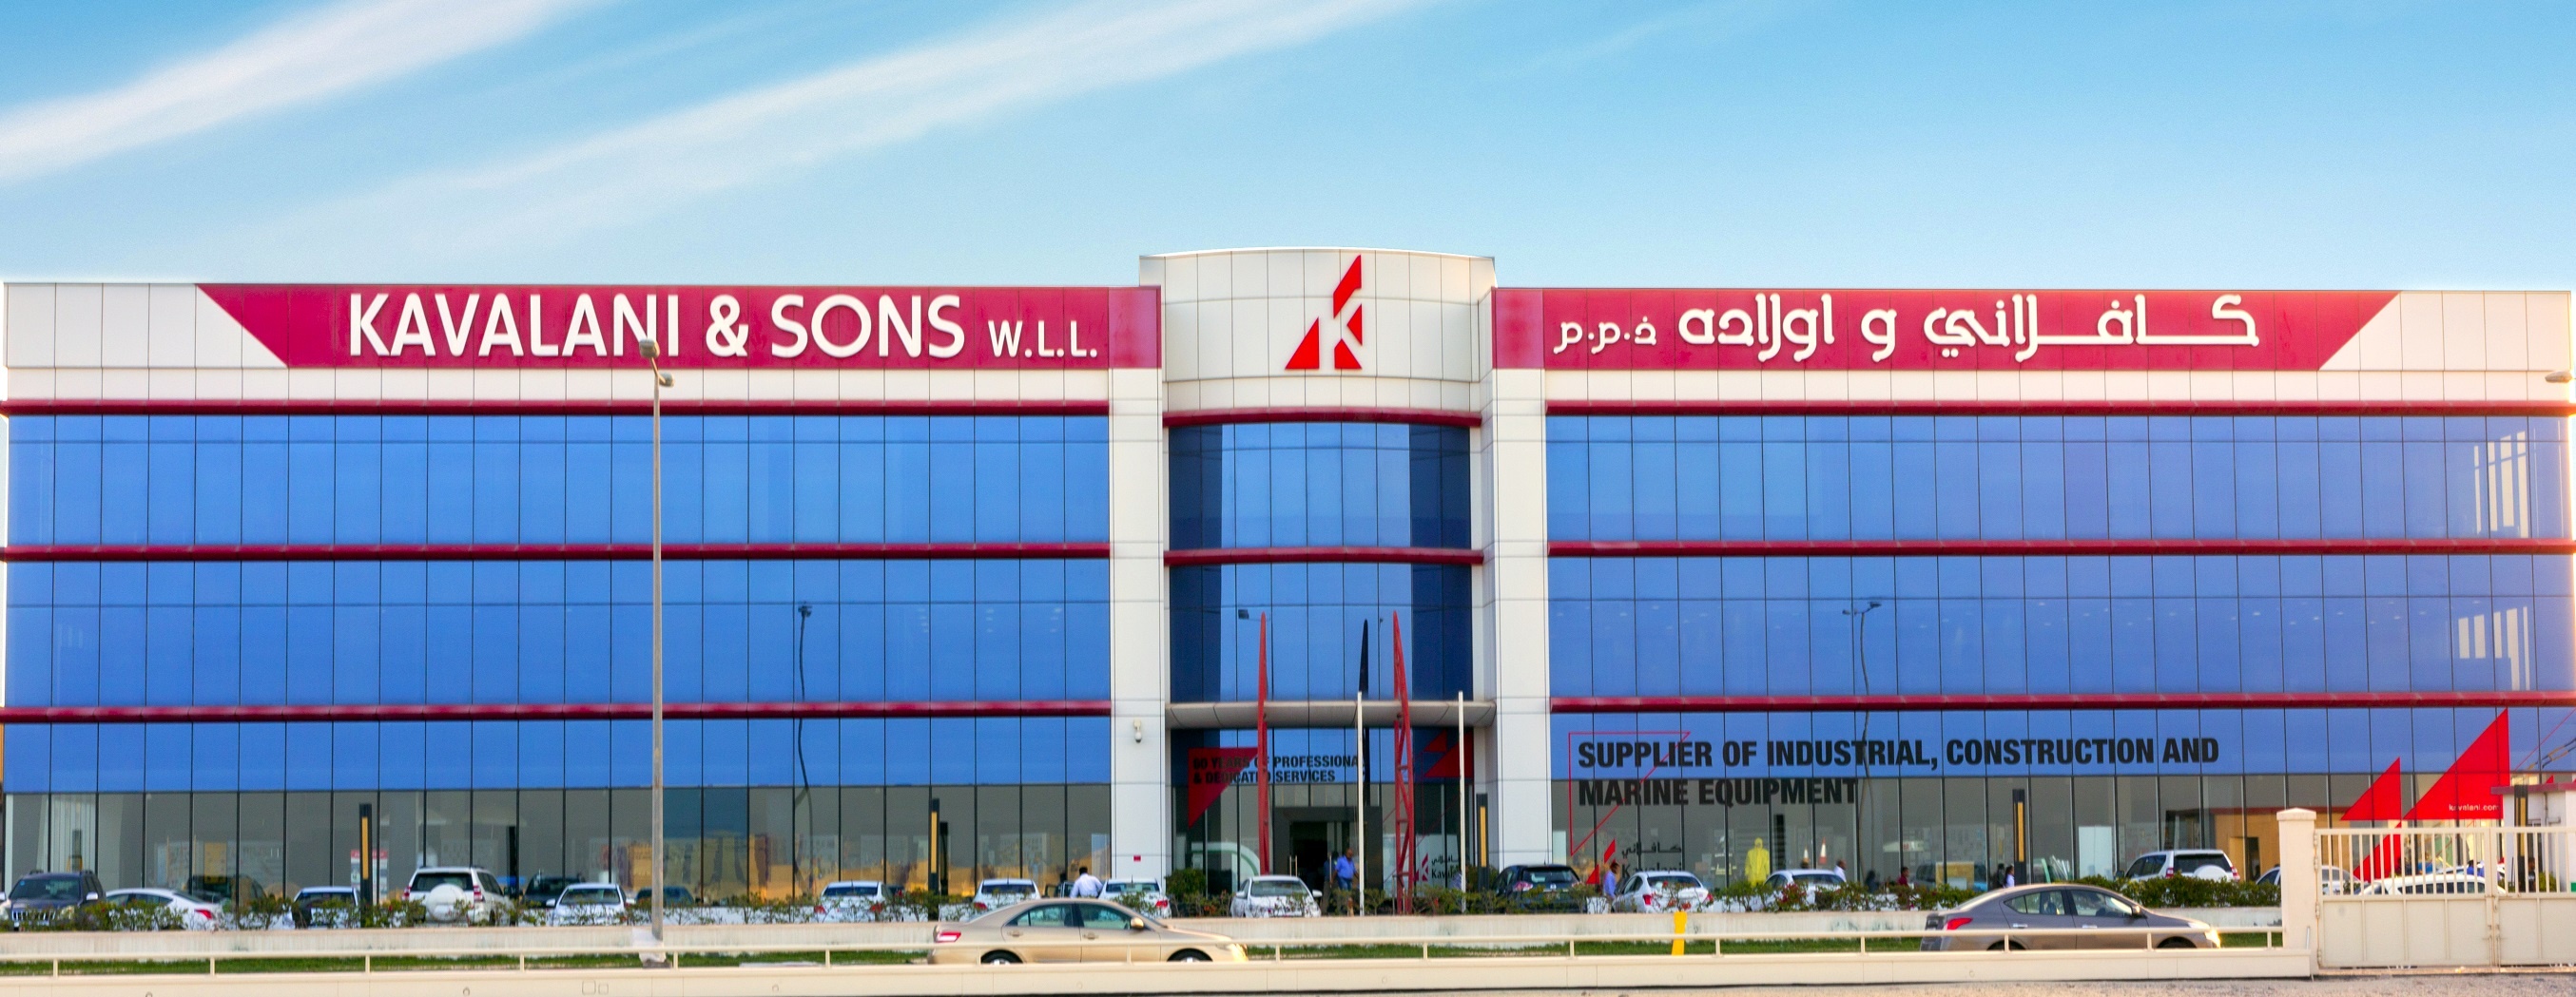 PETRONAS Lubricants International partners with Kavalani & Sons to enter Bahrain market and expand regional footprint